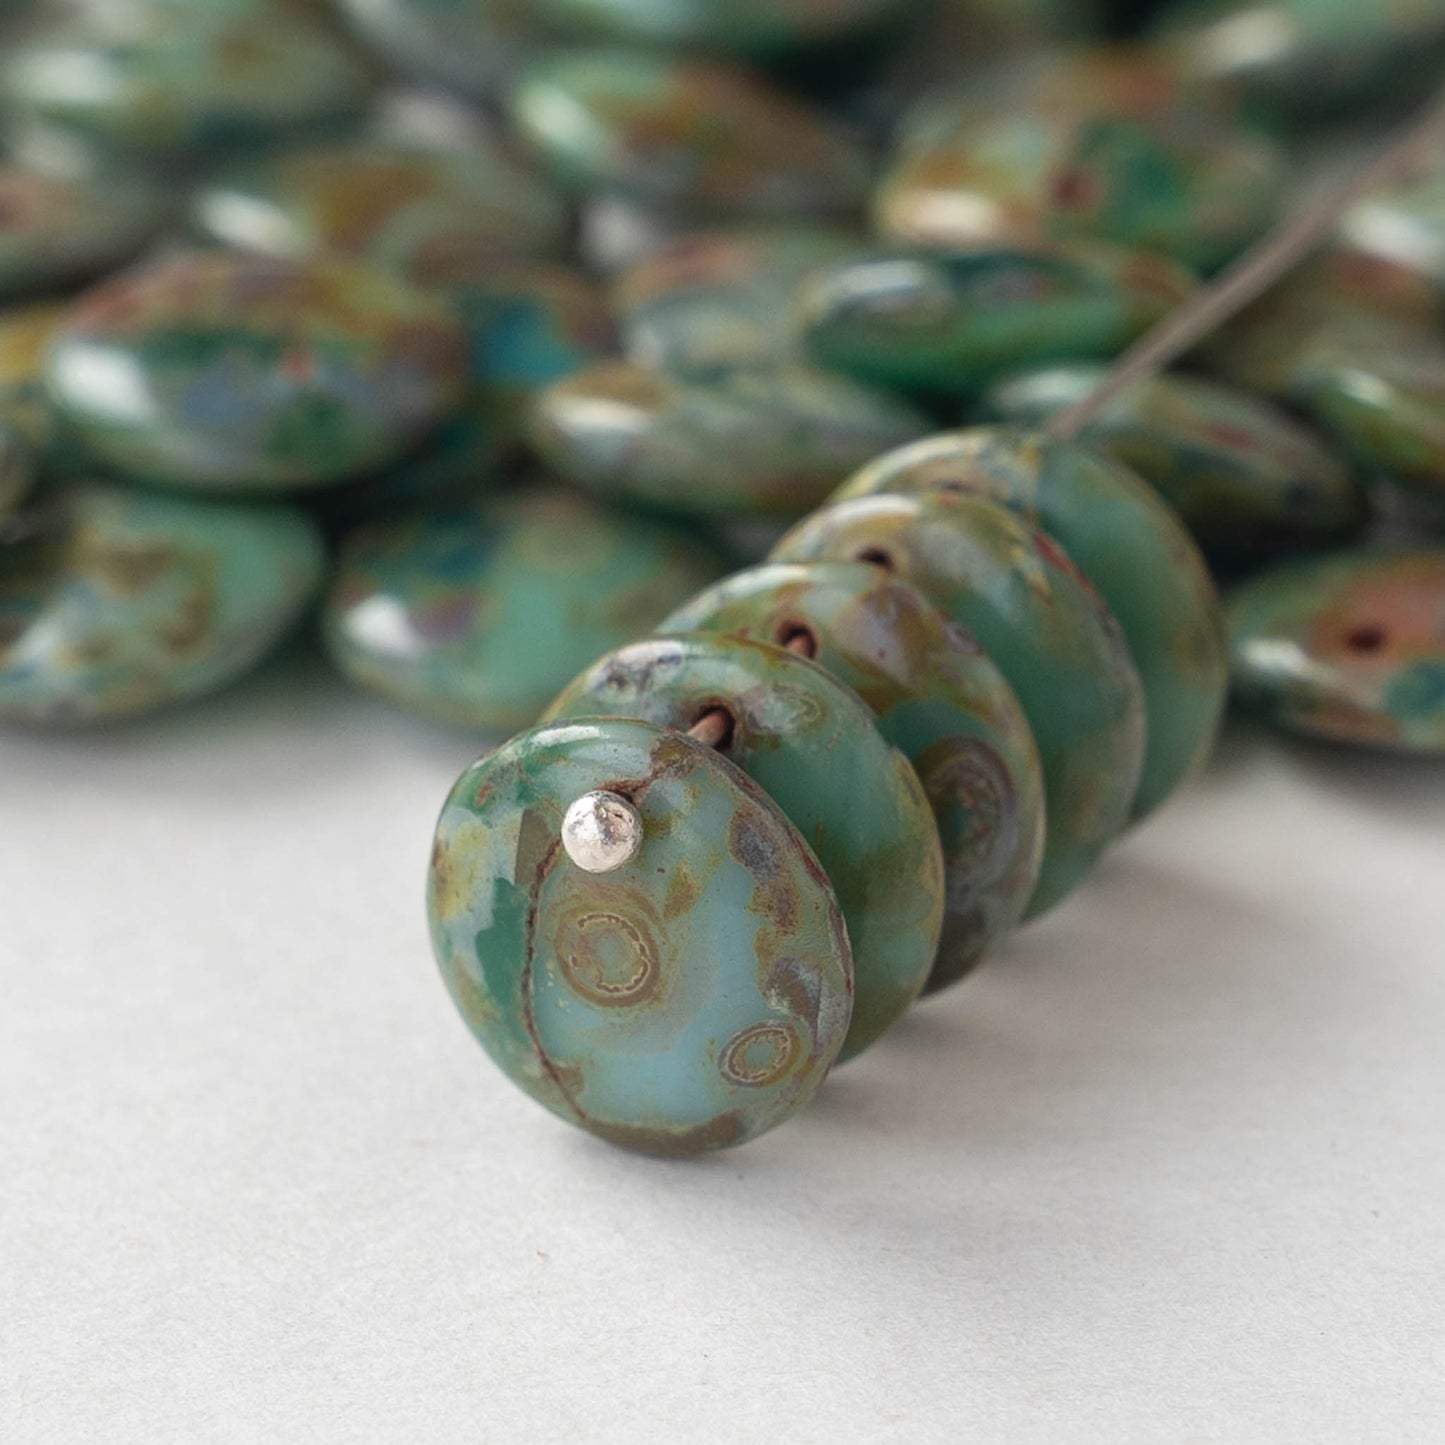 12mm Glass Lentil Beads - Teal Picasso Mix - 25 or 50 beads